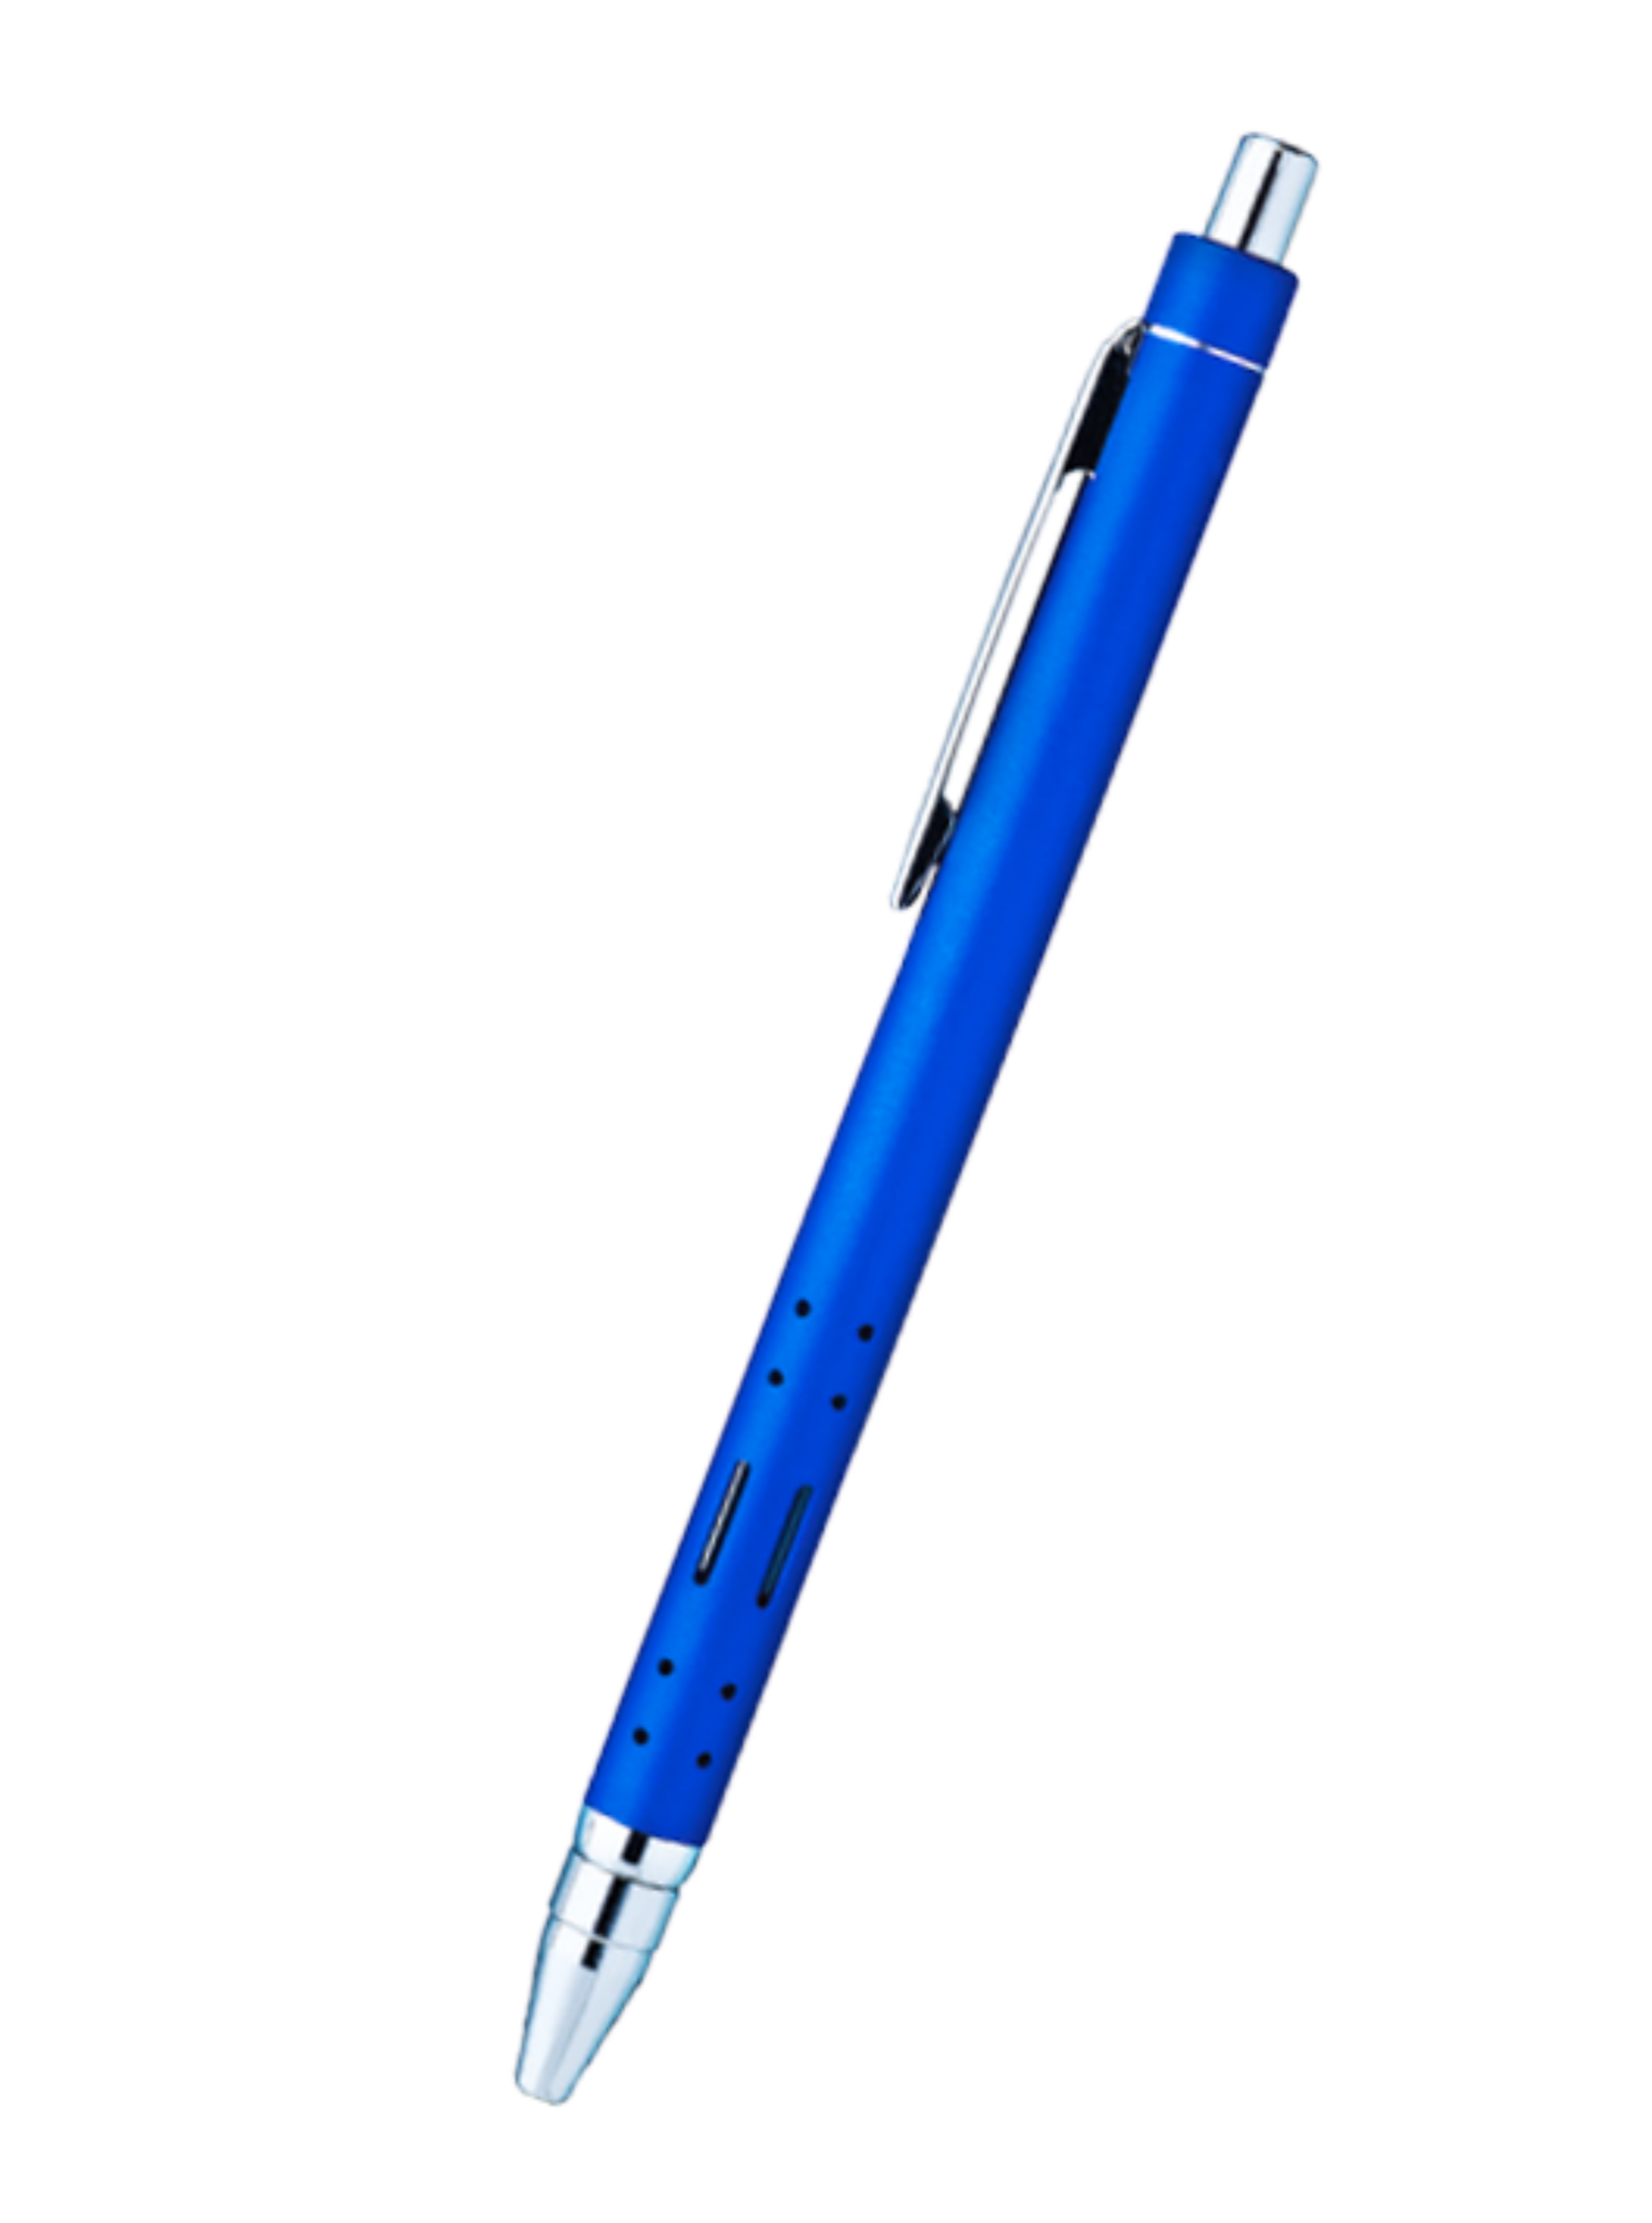 Cello Jet Ace Ball Pen Smooth Writing Blue Ball Pen Pack of 1